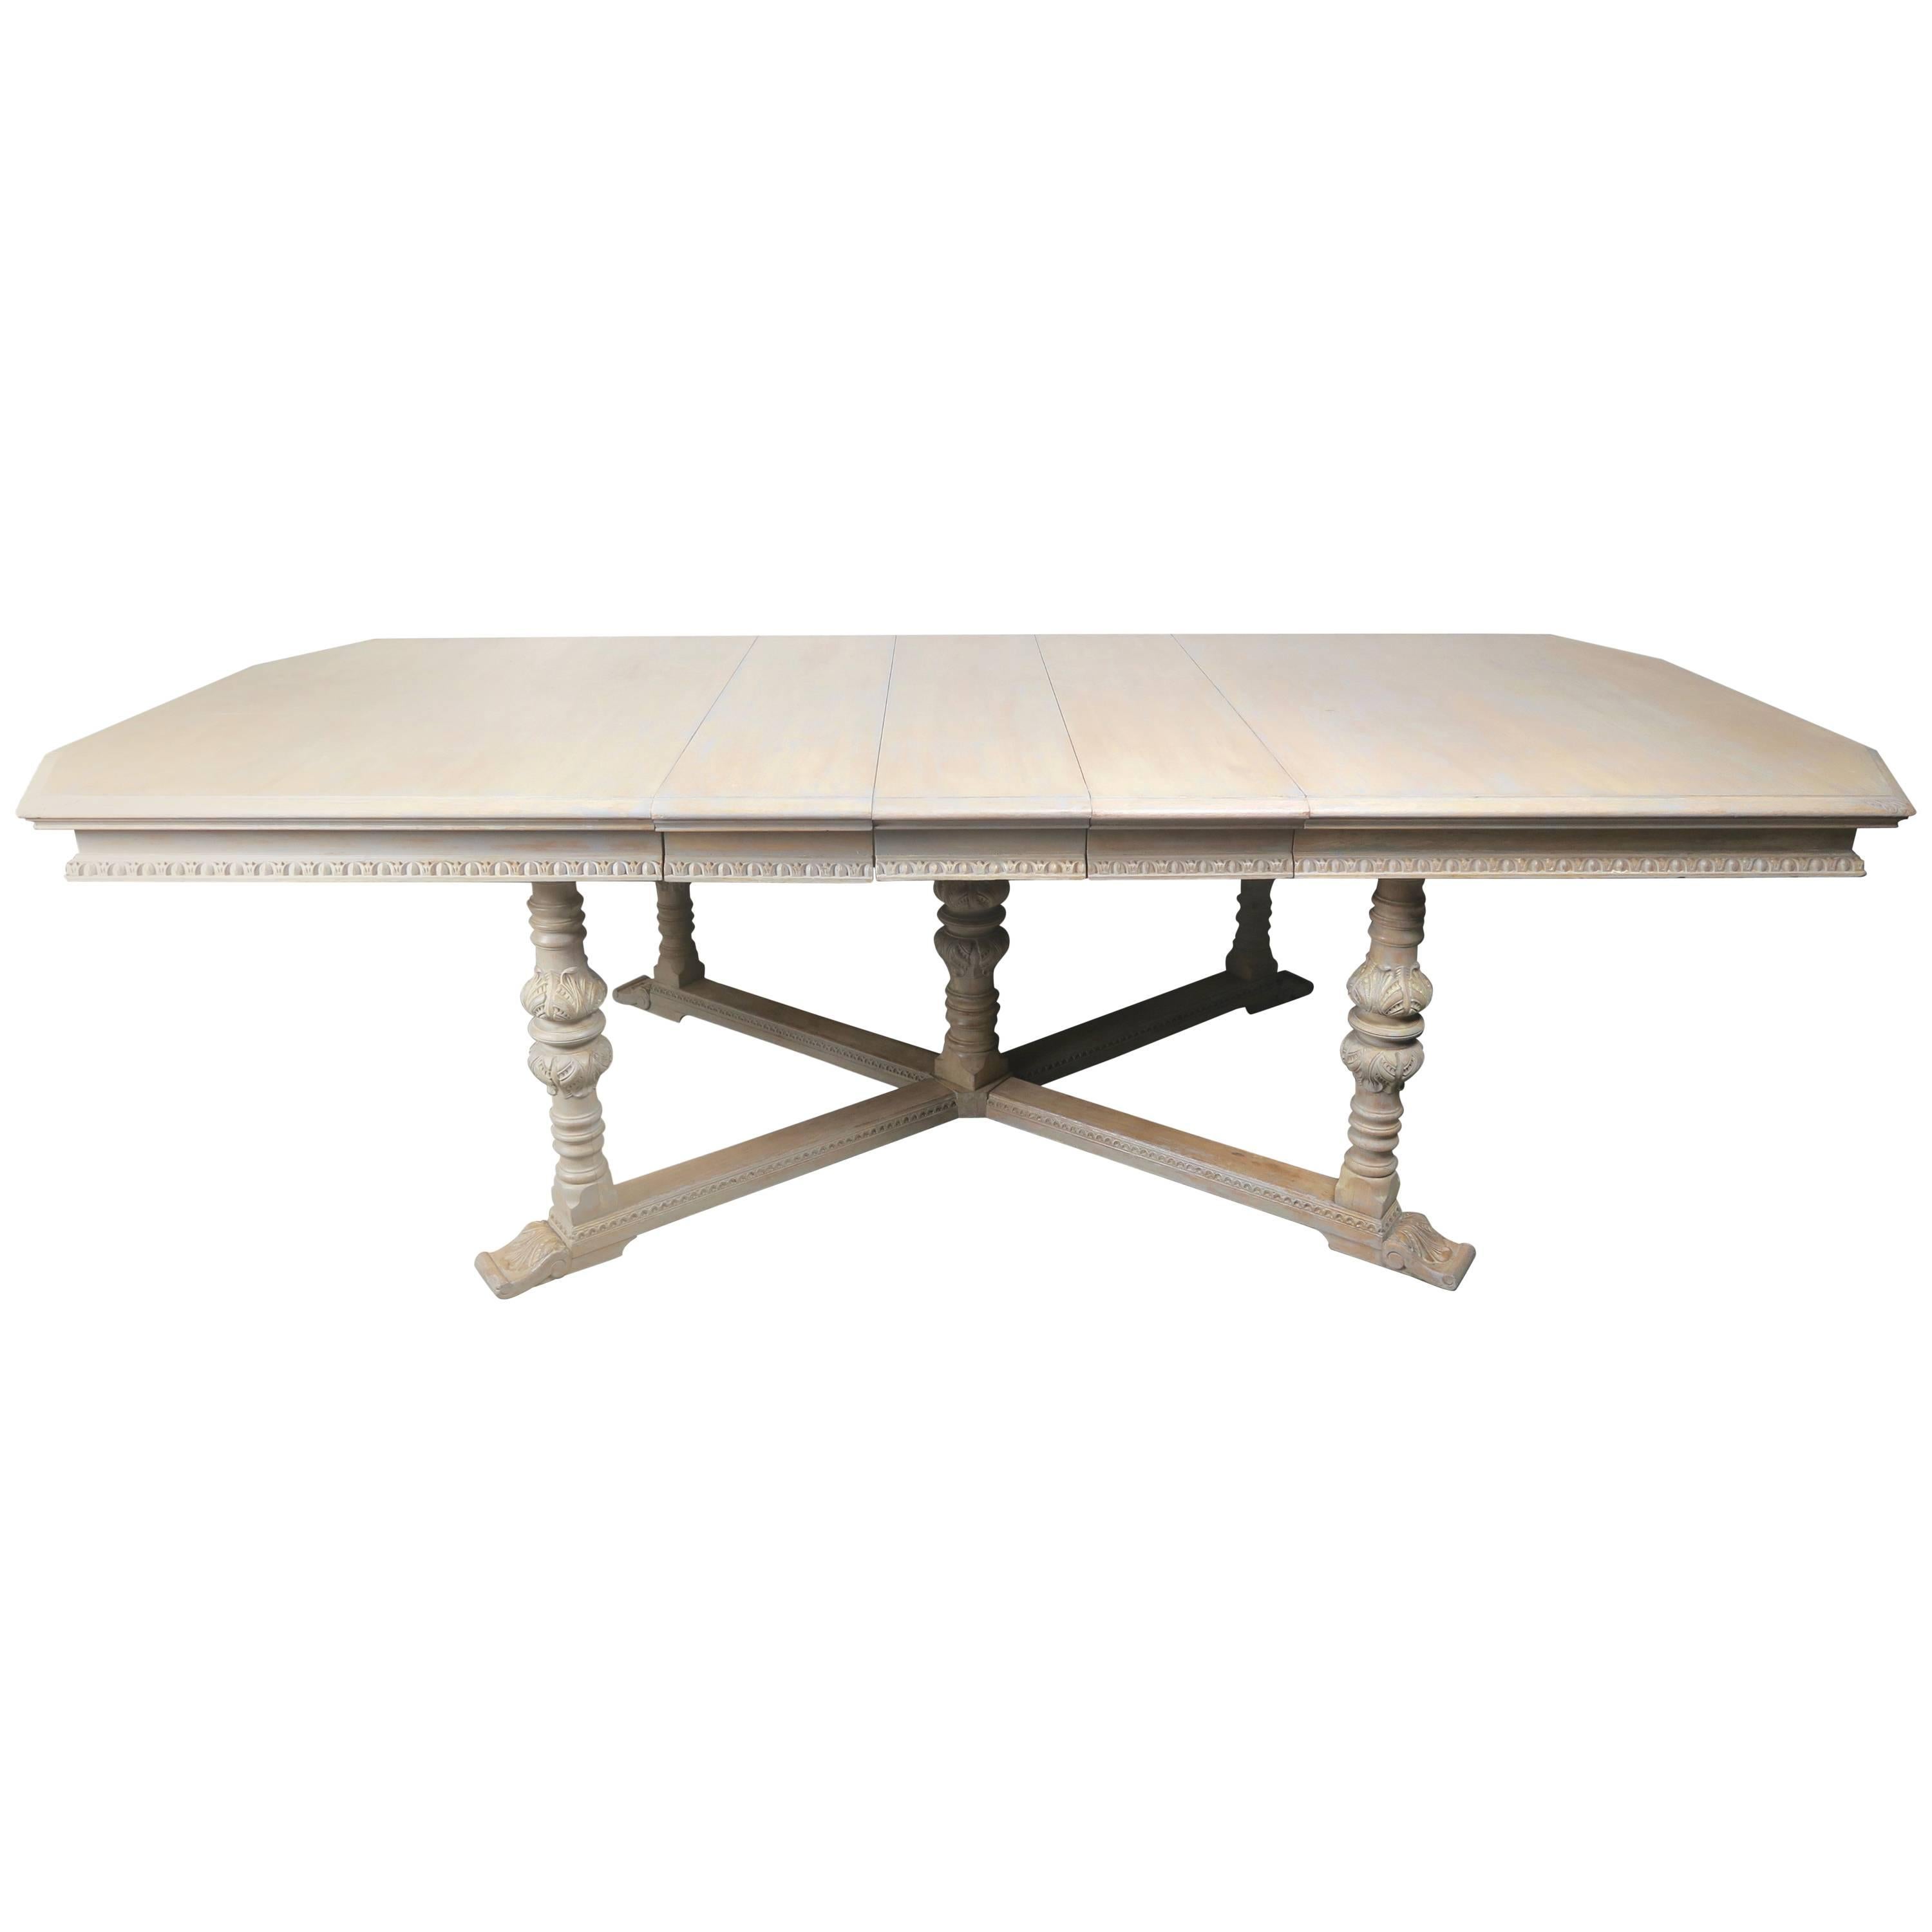 Italian Neoclassical Style Dining Room Table with Leaves